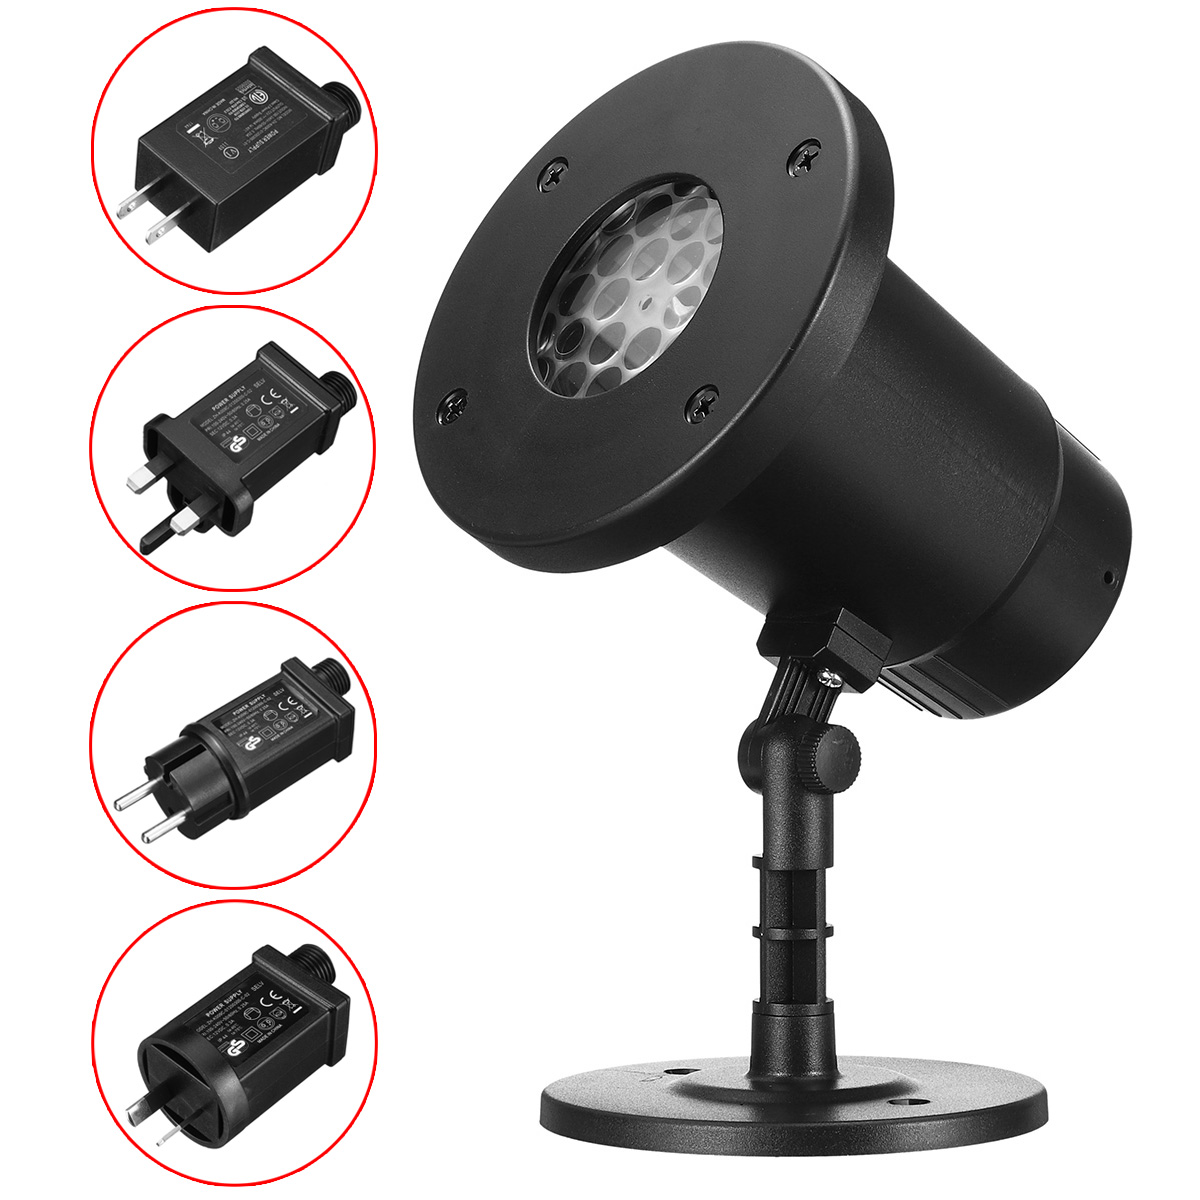 Portable-IP65-Waterproof-WhiteColorful-Snowflakes-Projector-Lamp-Outdoor-Work-Light-Landscape-Light--1605854